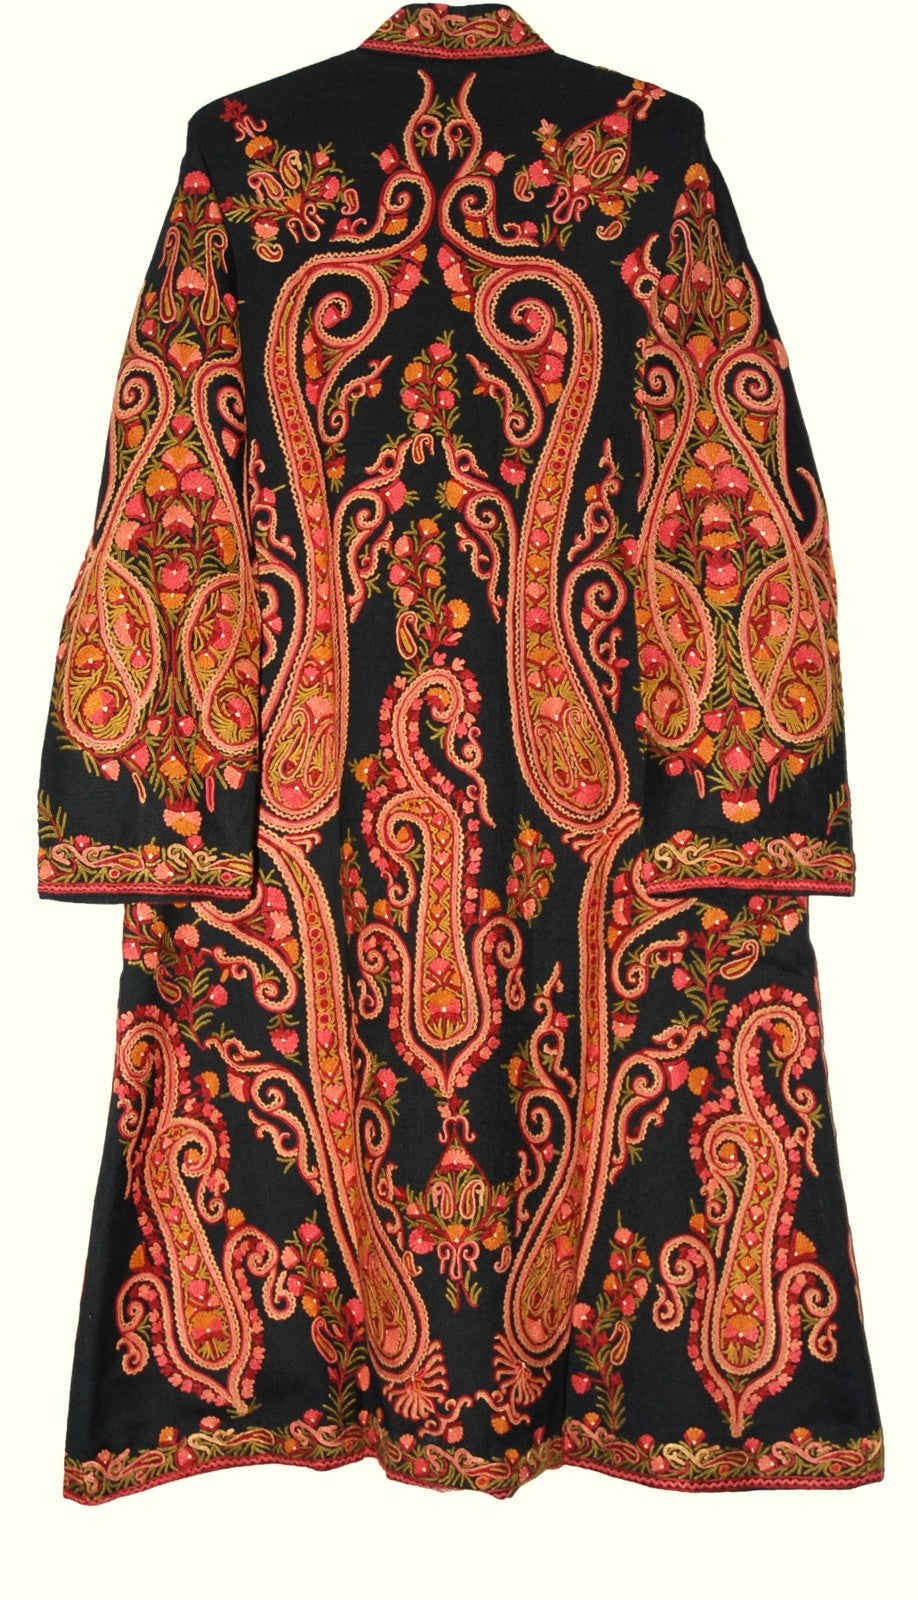 Woolen Coat Long Jacket Black, Rust and Olive Embroidery #AO-1604